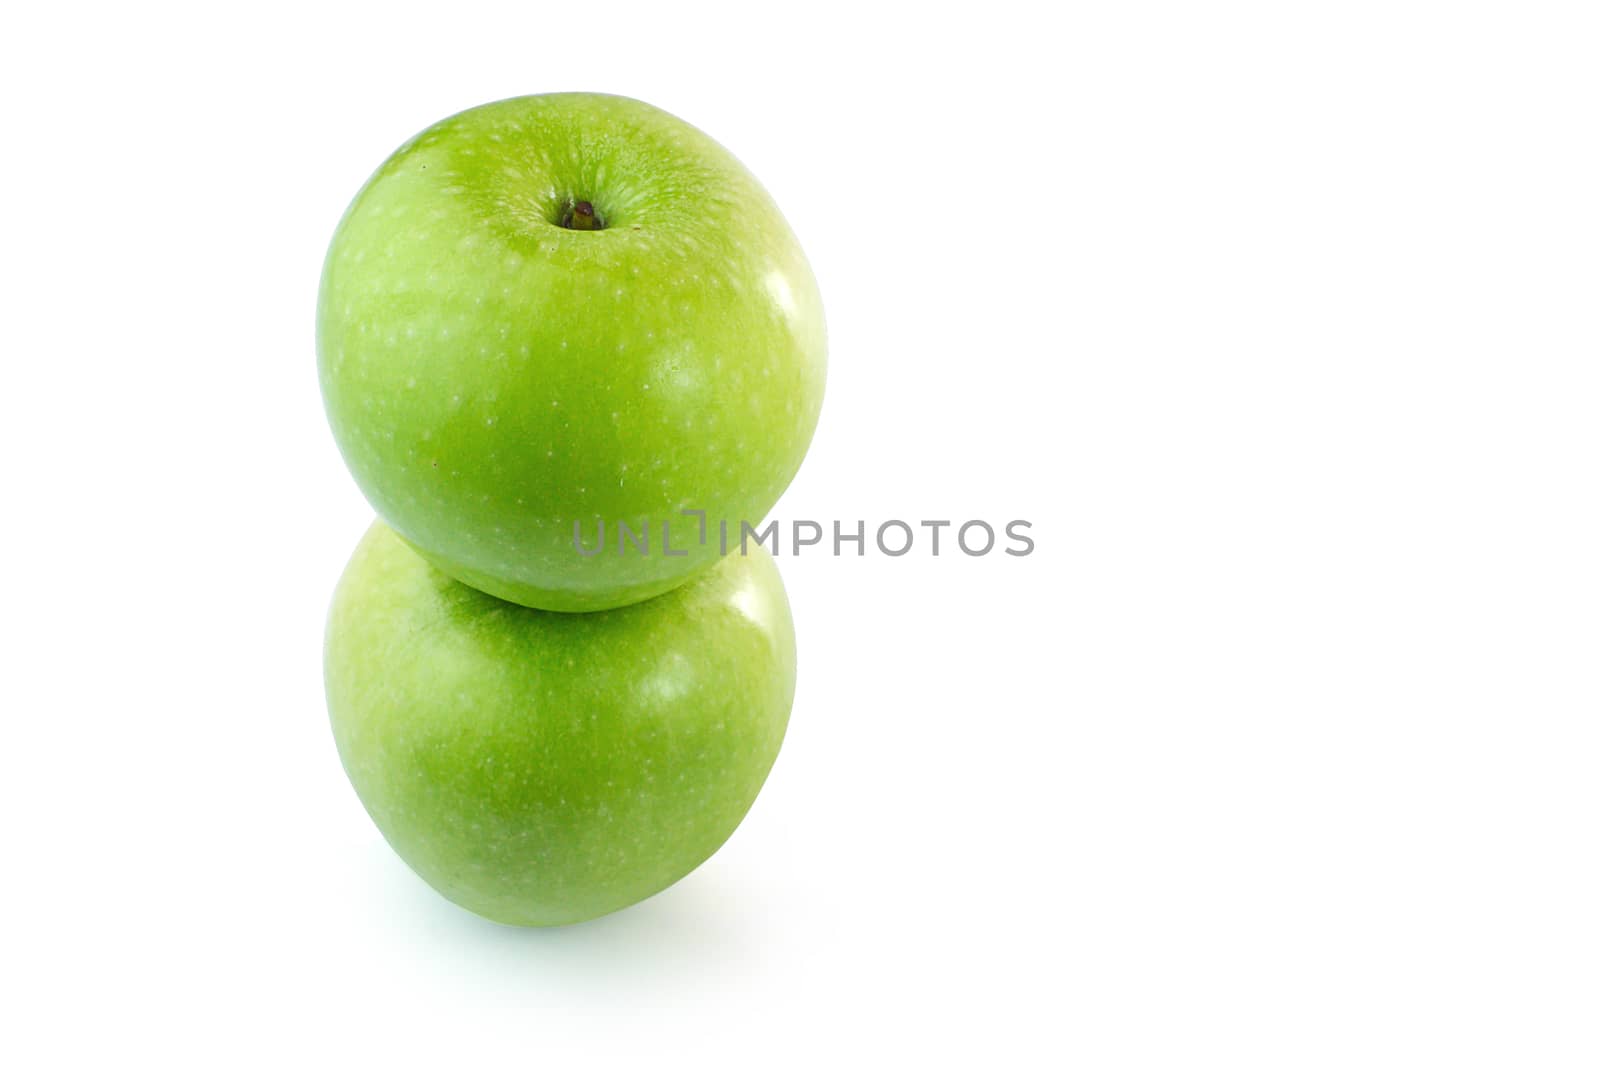 Green Apples isolate white background